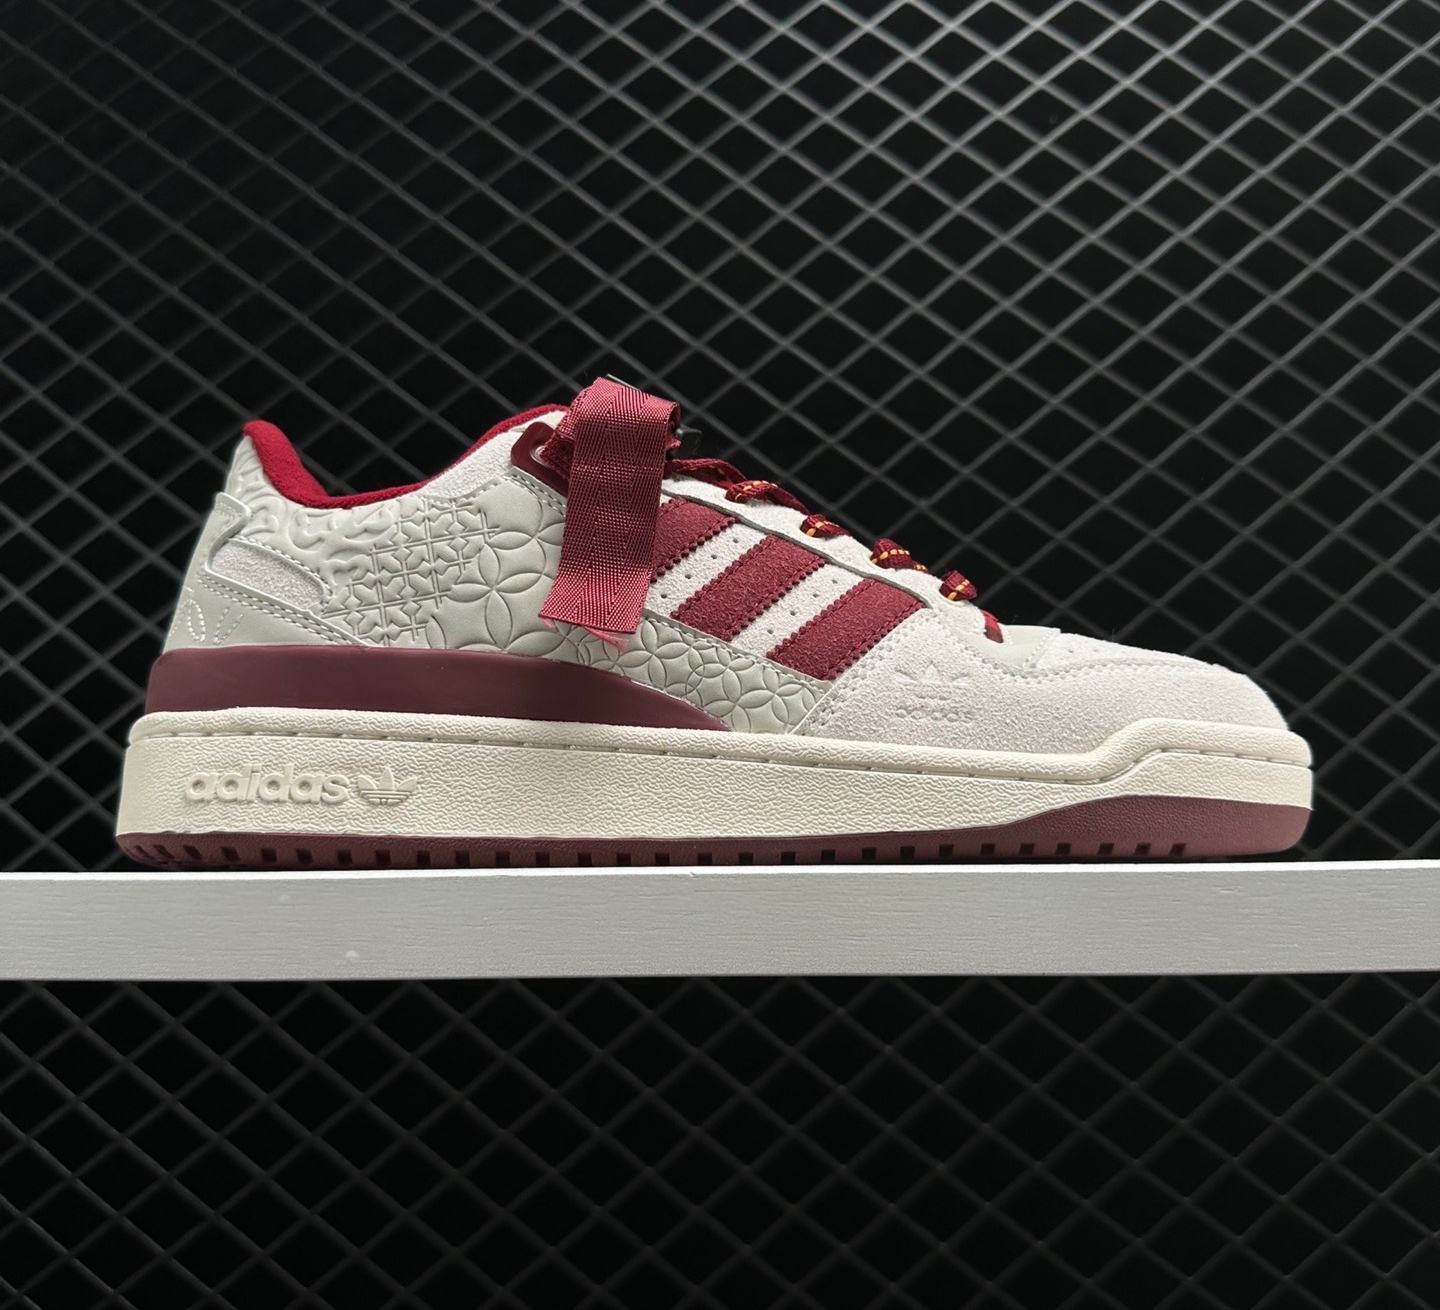 Adidas Originals Forum Low CNY Sneaker Unisex Beige White Red GX8866 - Limited Edition Chinese New Year Design